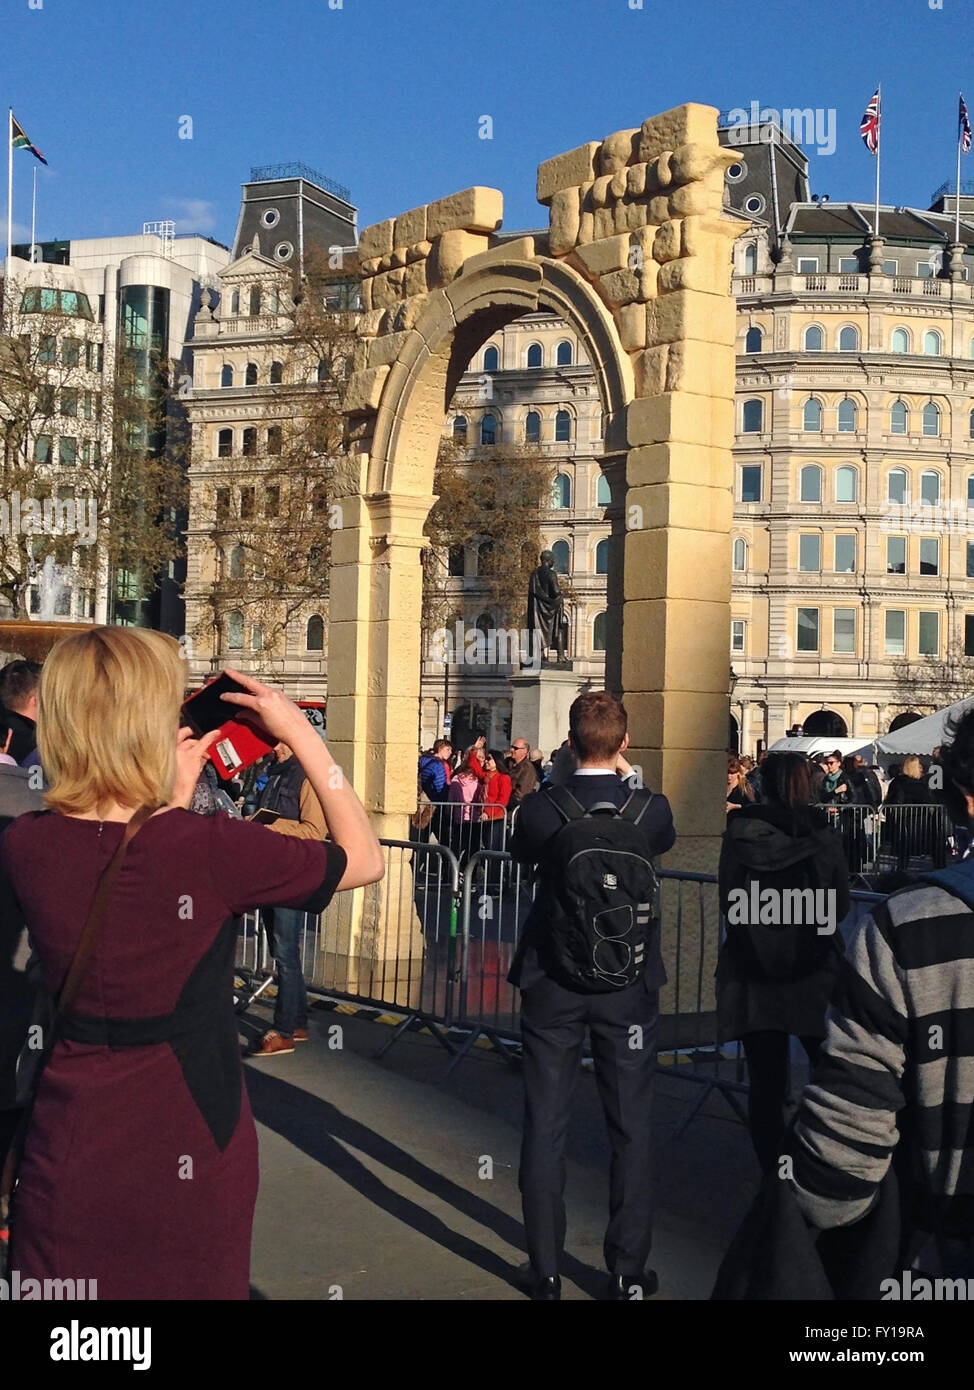 London, UK. 19th April, 2016. Crowds photographing and enjoying a recreation of the Arch of Triumph from Syria's ancient city of Palmyra.  The arch has been recreated by 3D printing and will travel the world. Credit:  Amanda Lewis/Alamy Live News Stock Photo